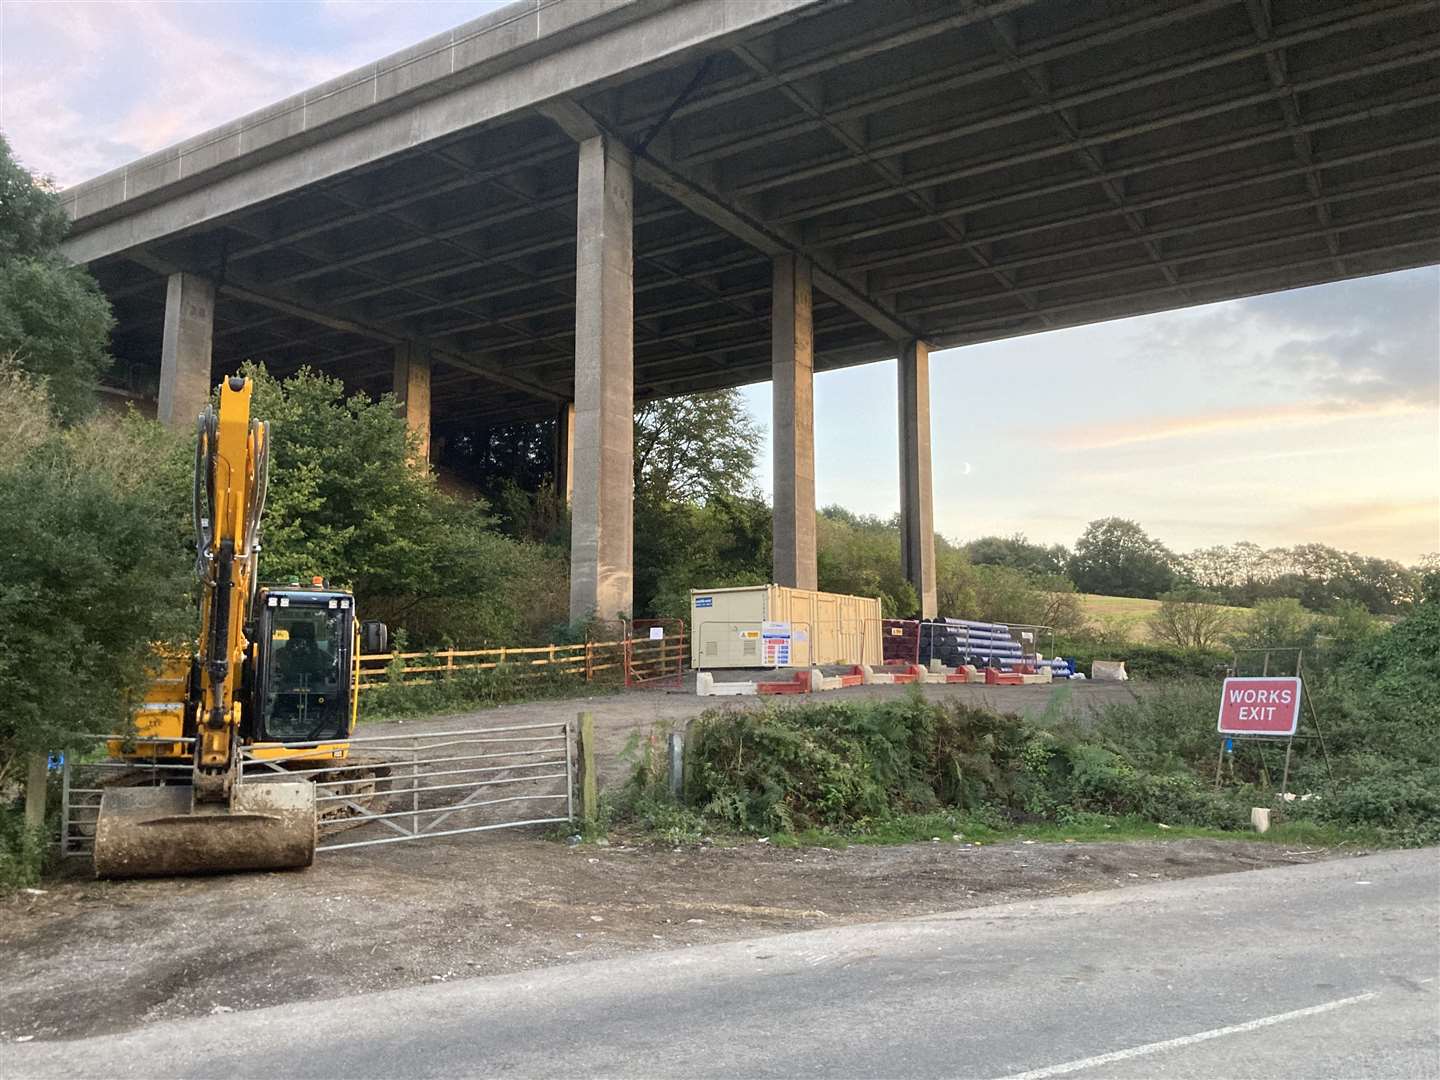 Preparatory work is underway at Stockbury roundabout for a new flyover